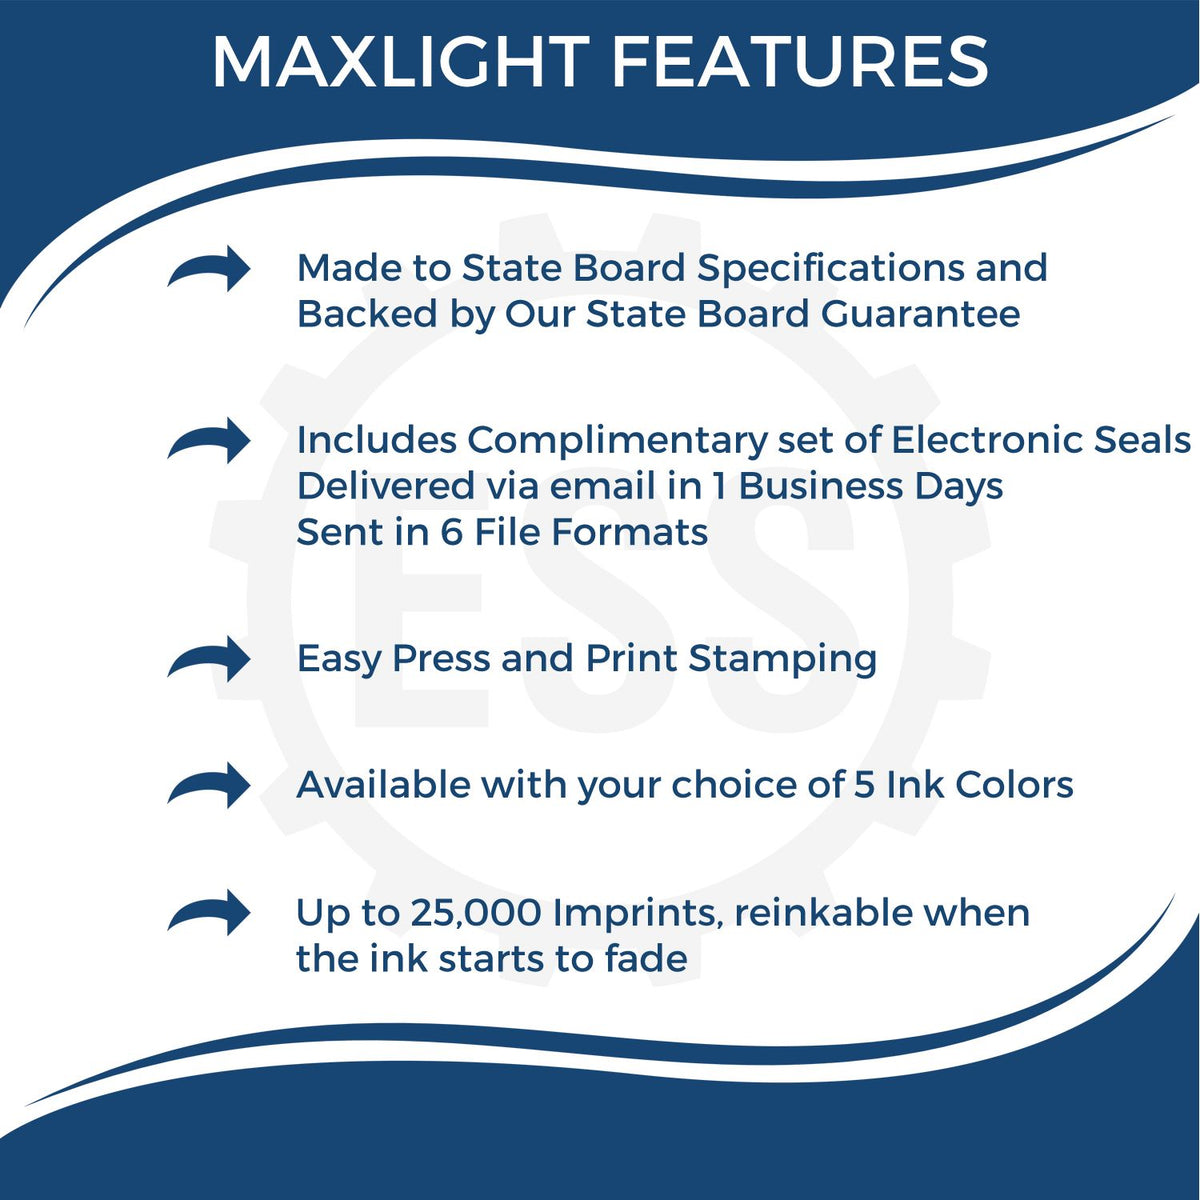 A picture of an infographic highlighting the selling points for the Premium MaxLight Pre-Inked Tennessee Engineering Stamp